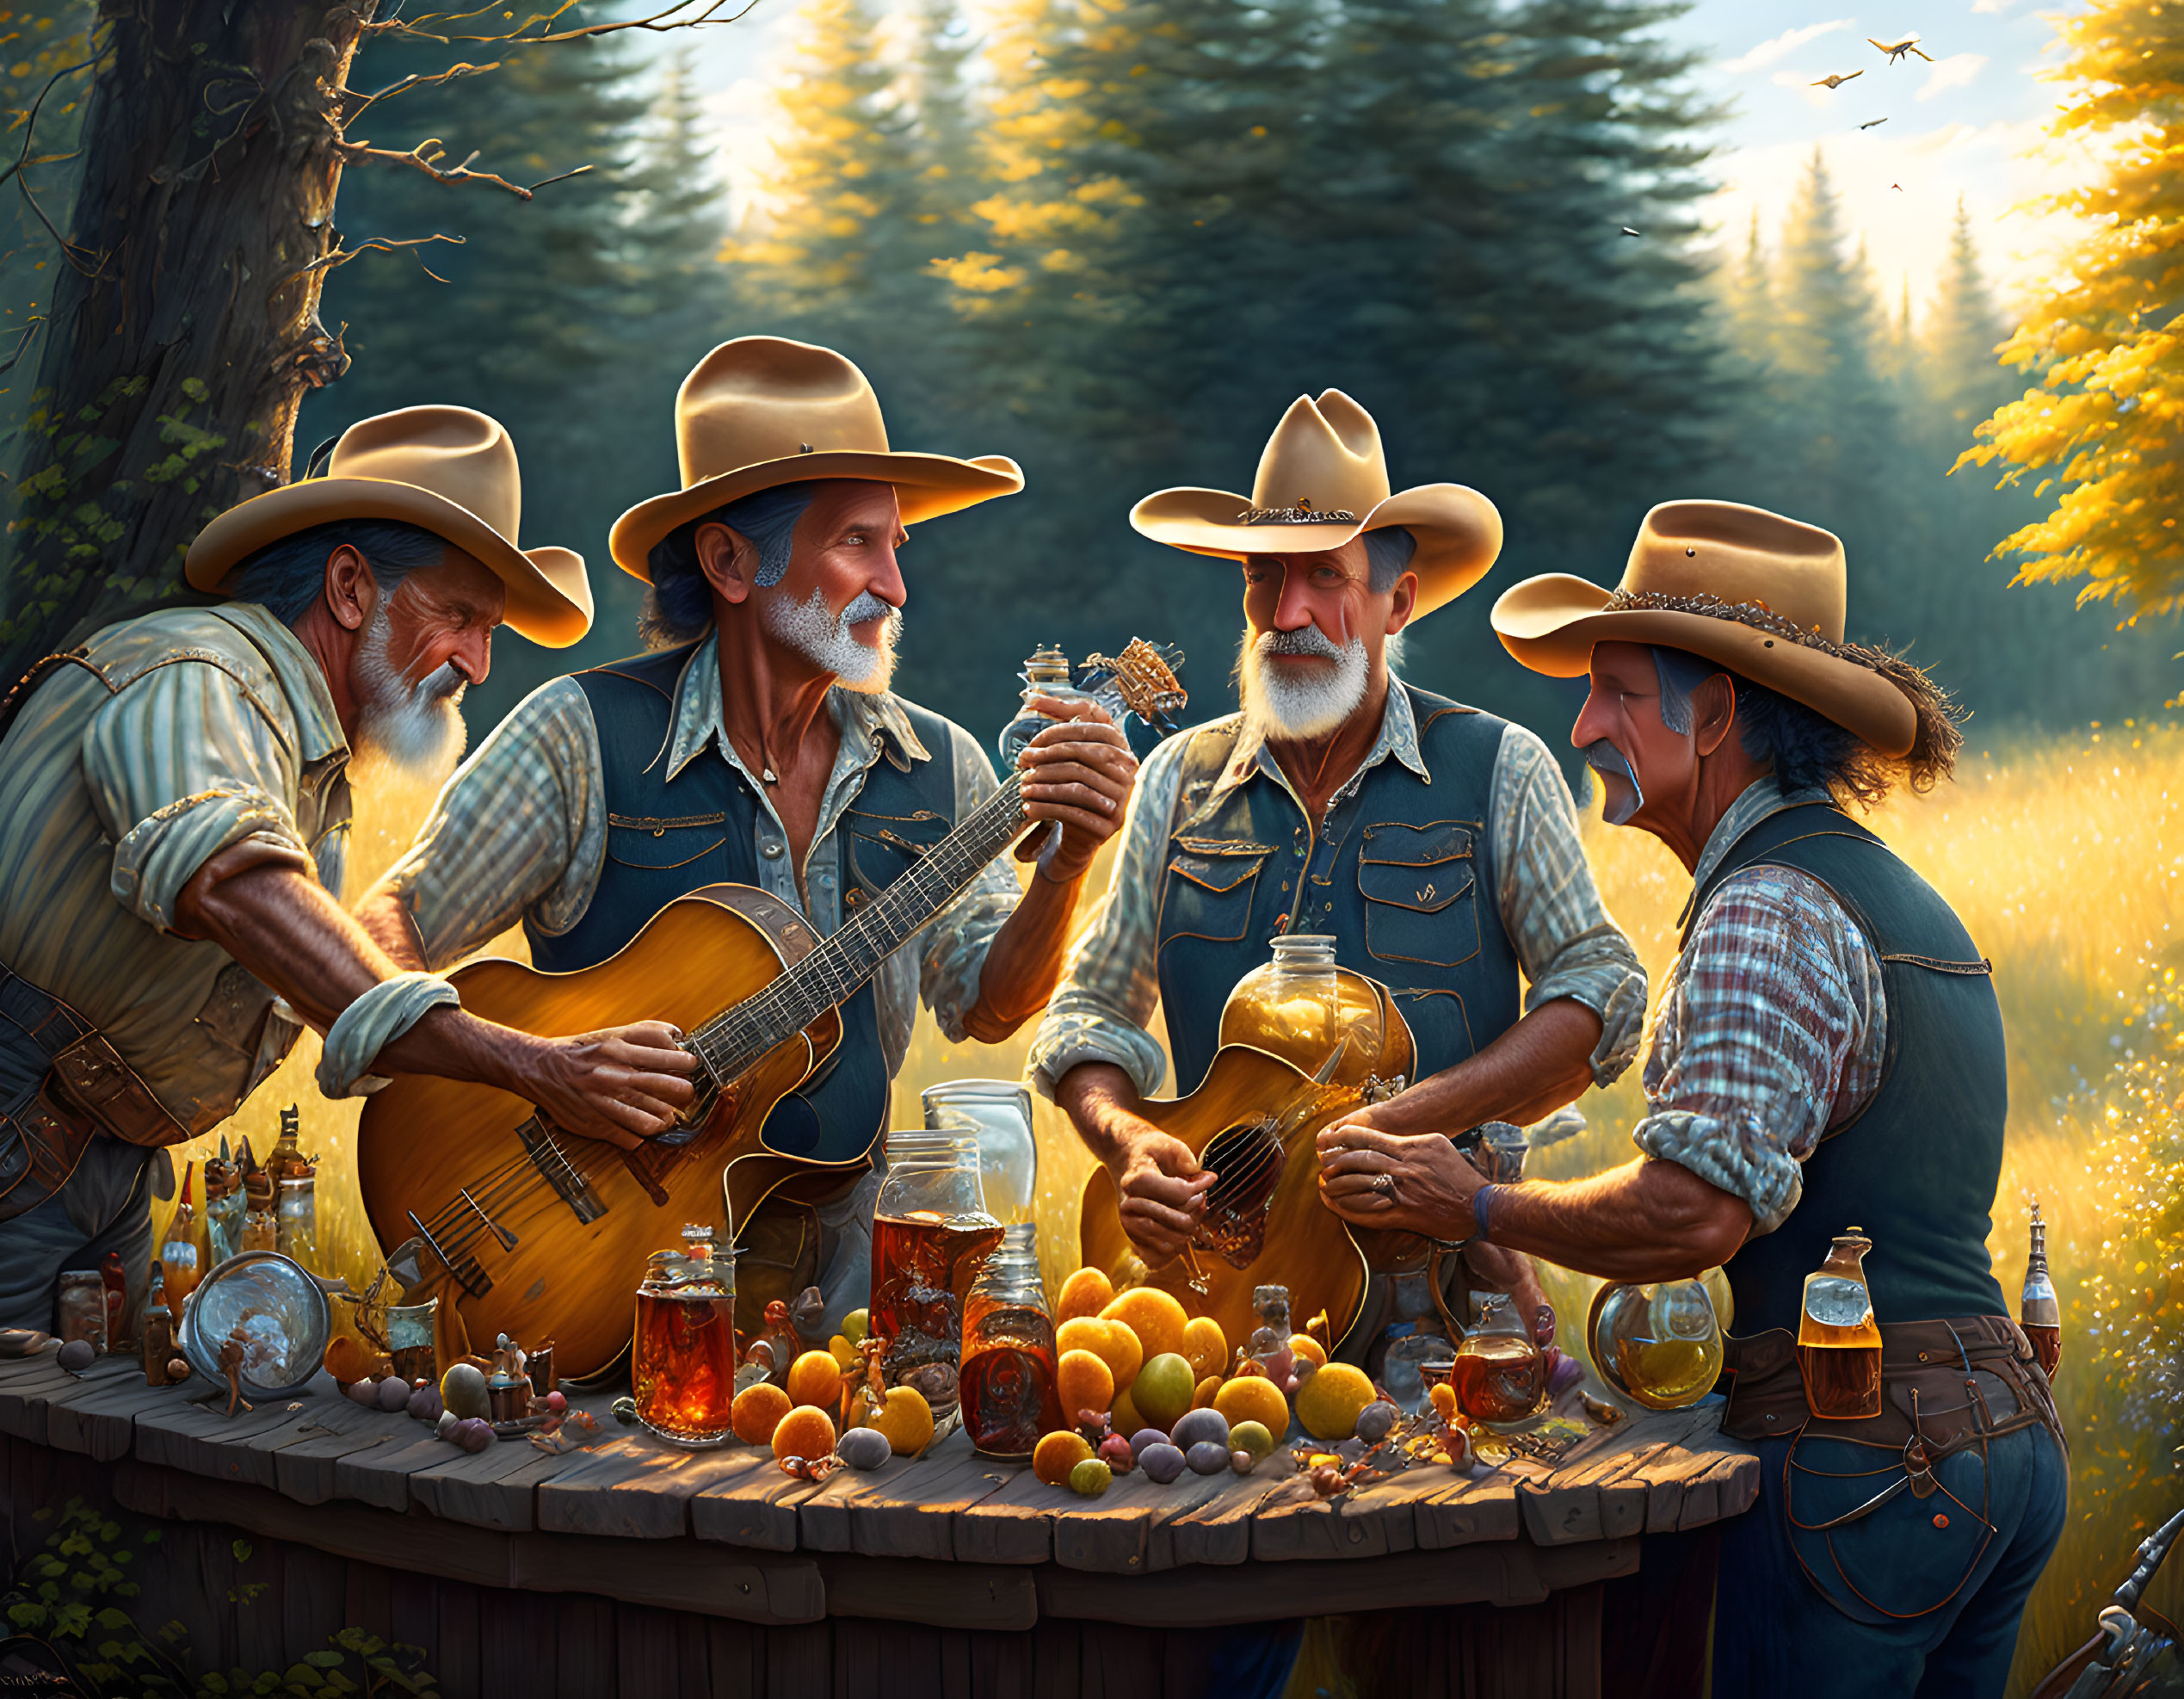 Four animated cowboys socialize around a table in the woods playing guitar, surrounded by jars of preserves